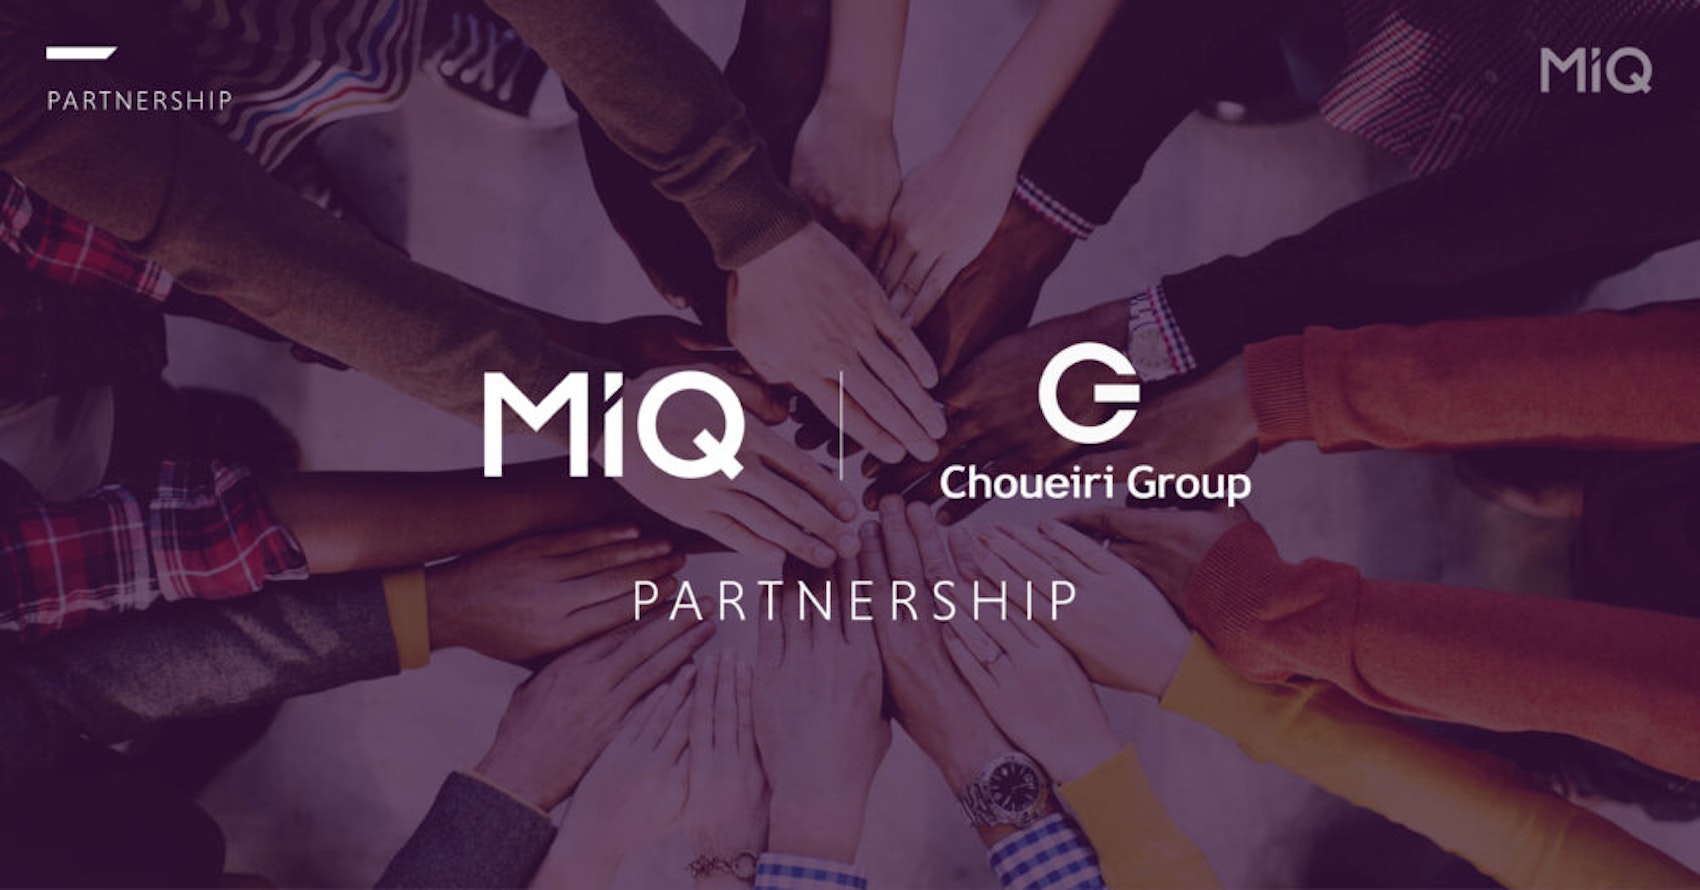 Choueiri group’s “Media Dome” exclusively brings MiQ to the MENA region